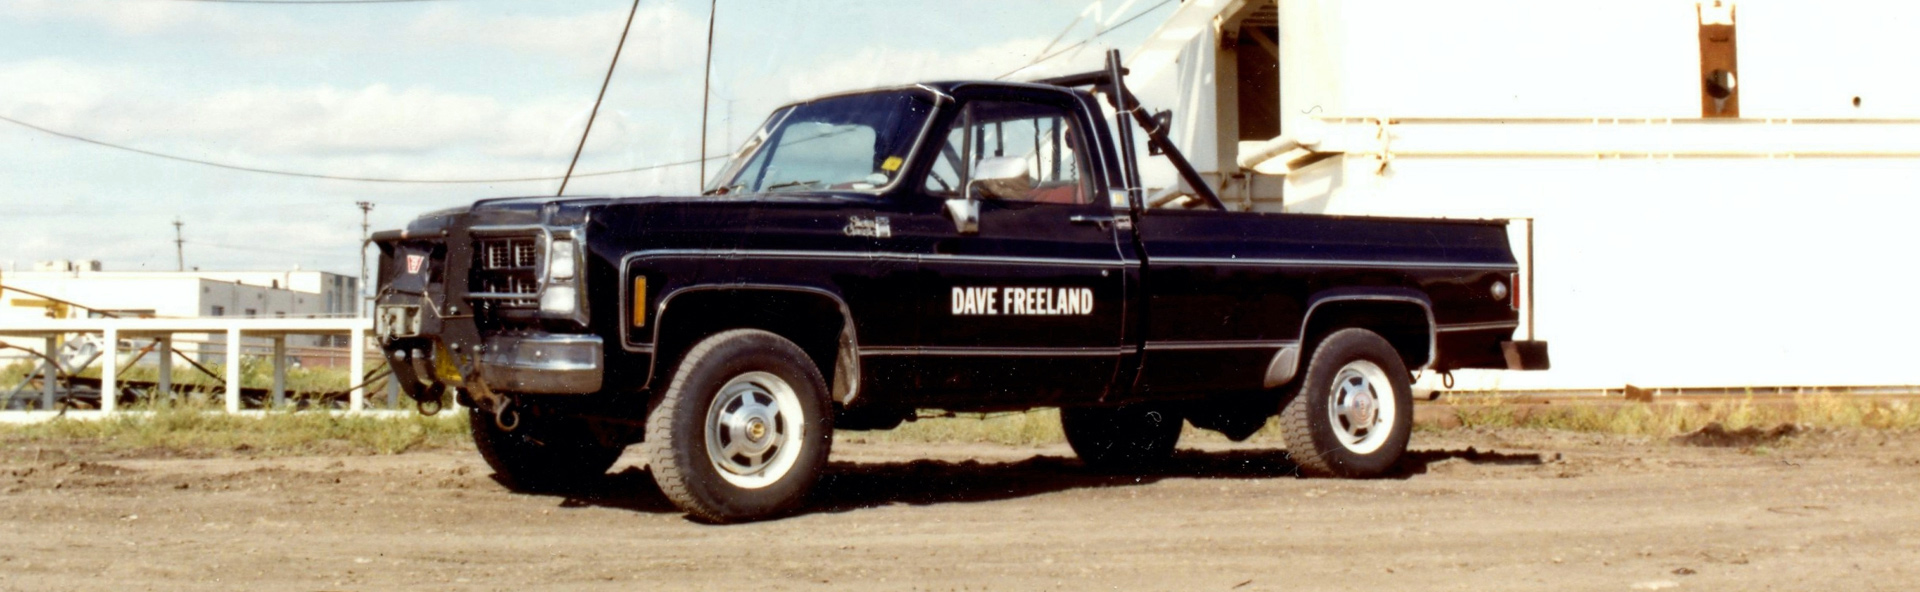 DFI Our History Dave Freeland Pick-Up Truck